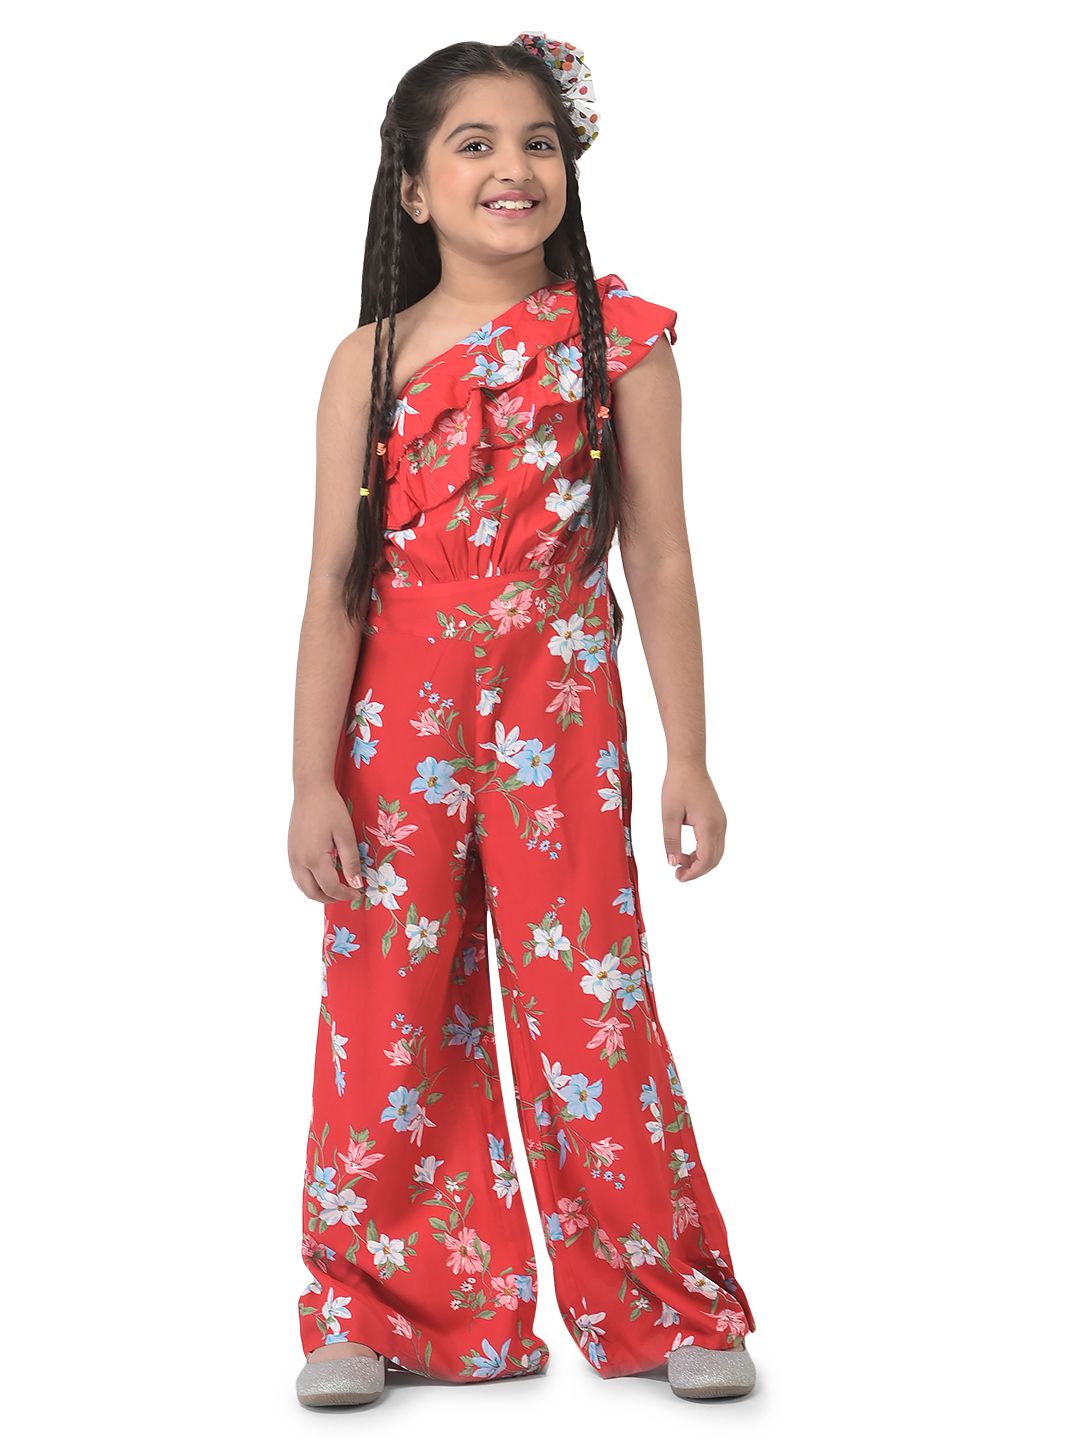 Share more than 168 jumpsuit for 10 year girl best